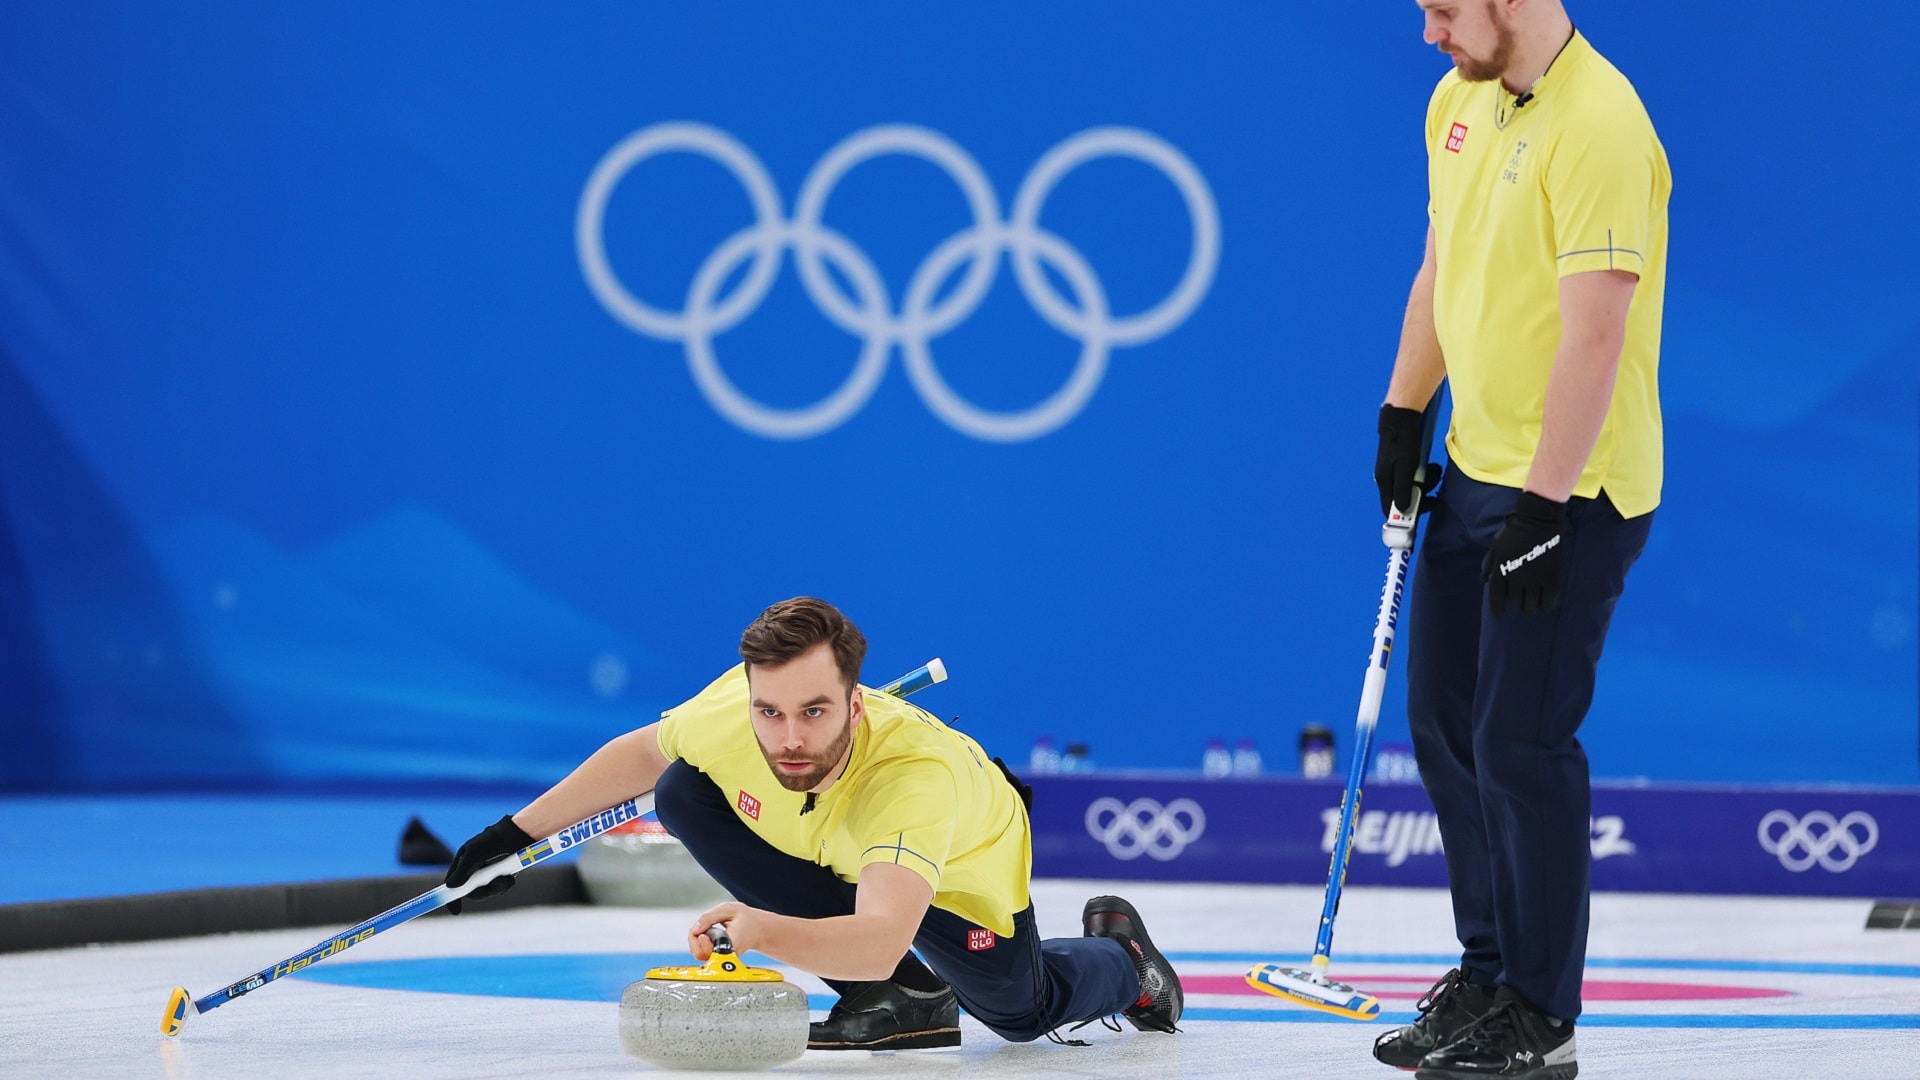 Video Sweden puts up a fight, USA concedes mens curling match